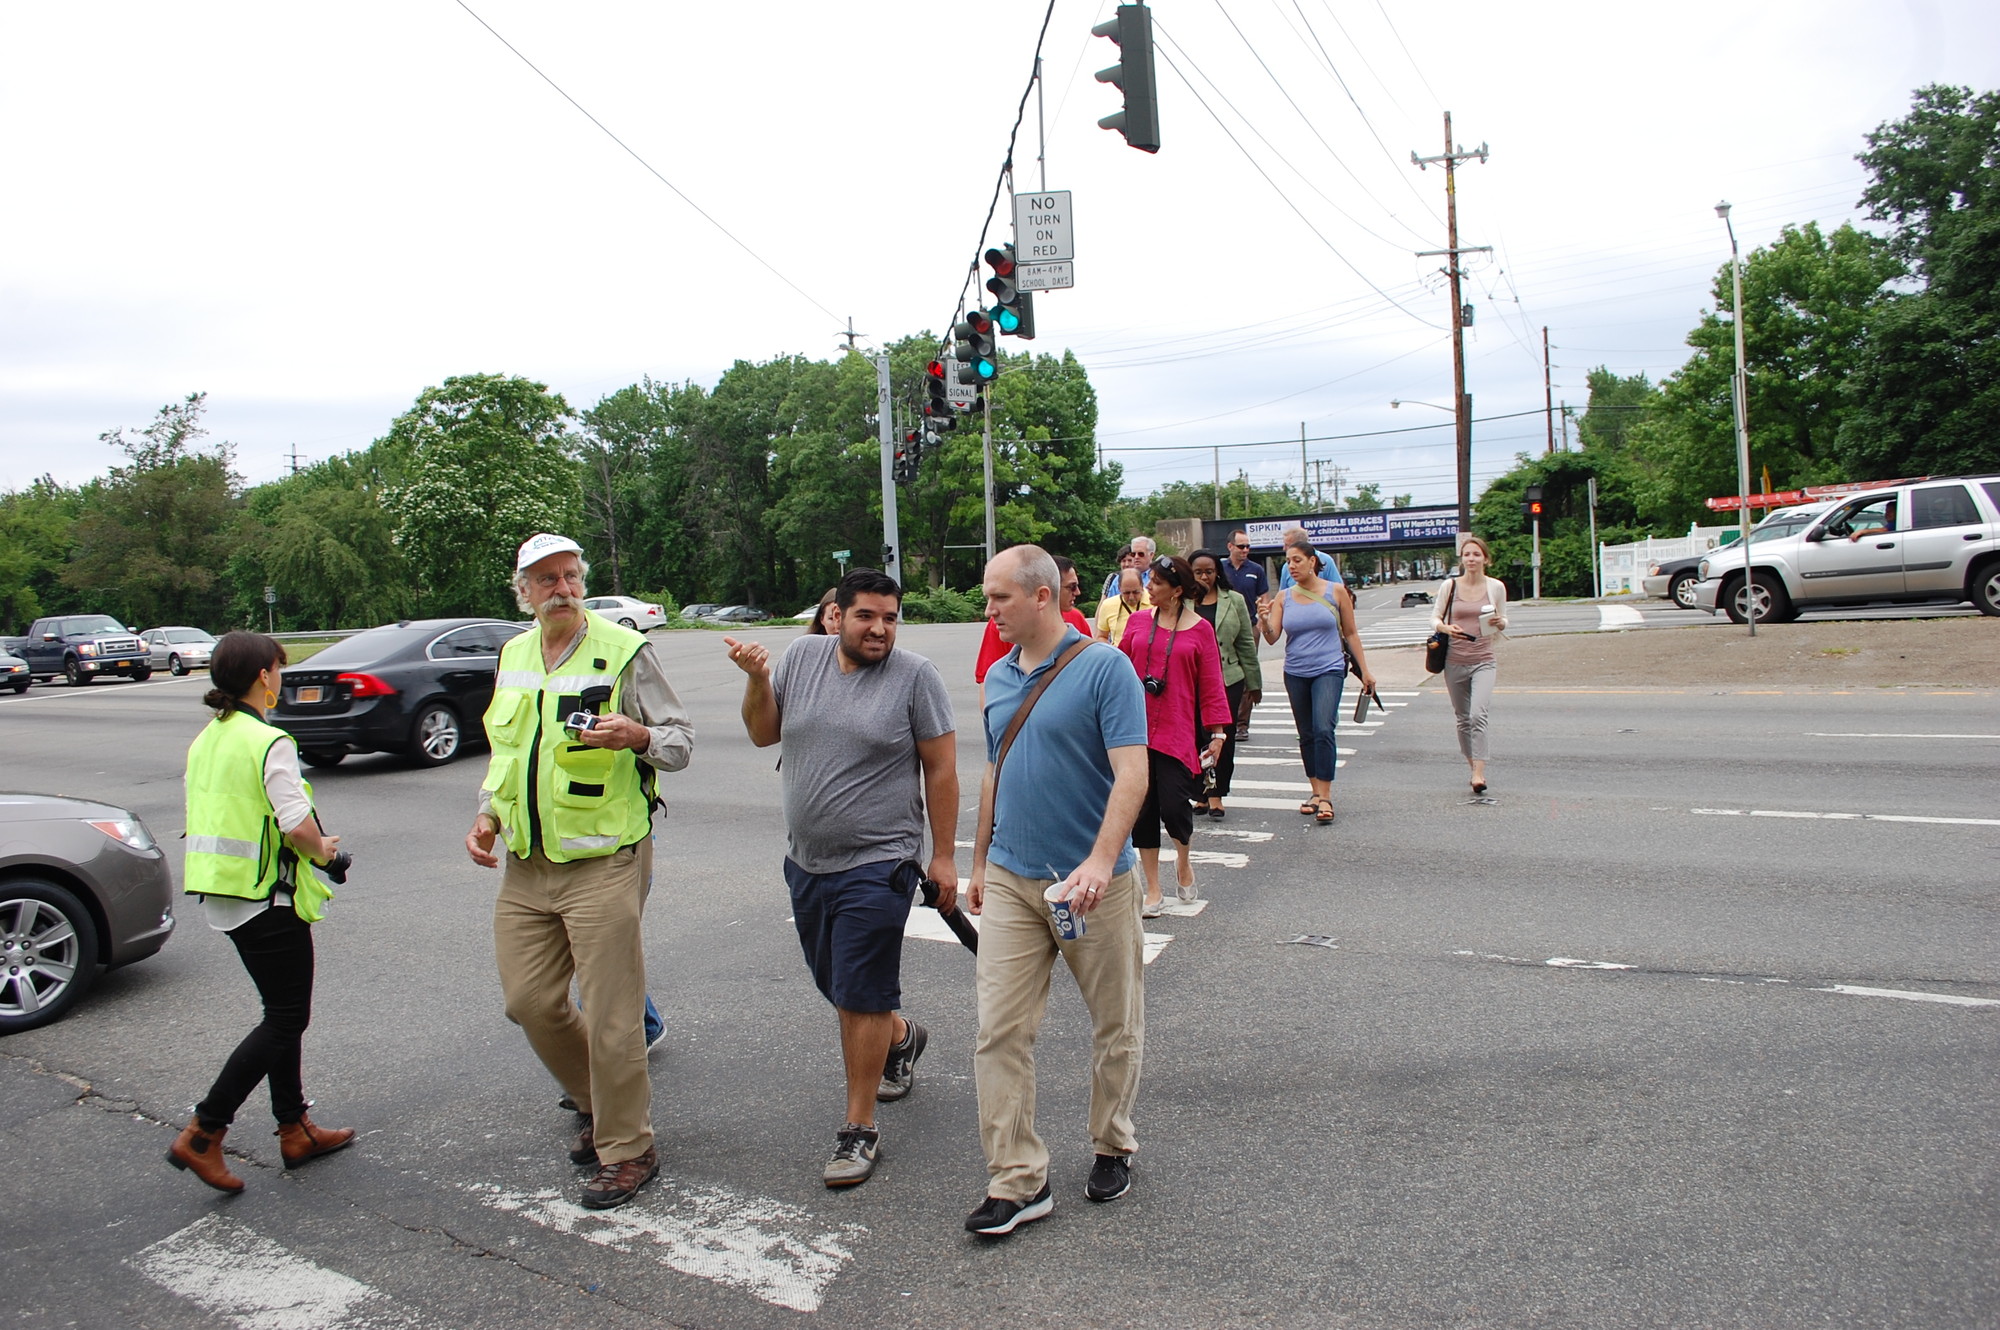 Transportation expert Dan Burden led a group of local leaders and residents across Sunrise Highway in Valley Stream on June 19 as part of a three-stop tour focusing on pedestrian safety along the major thoroughfare.